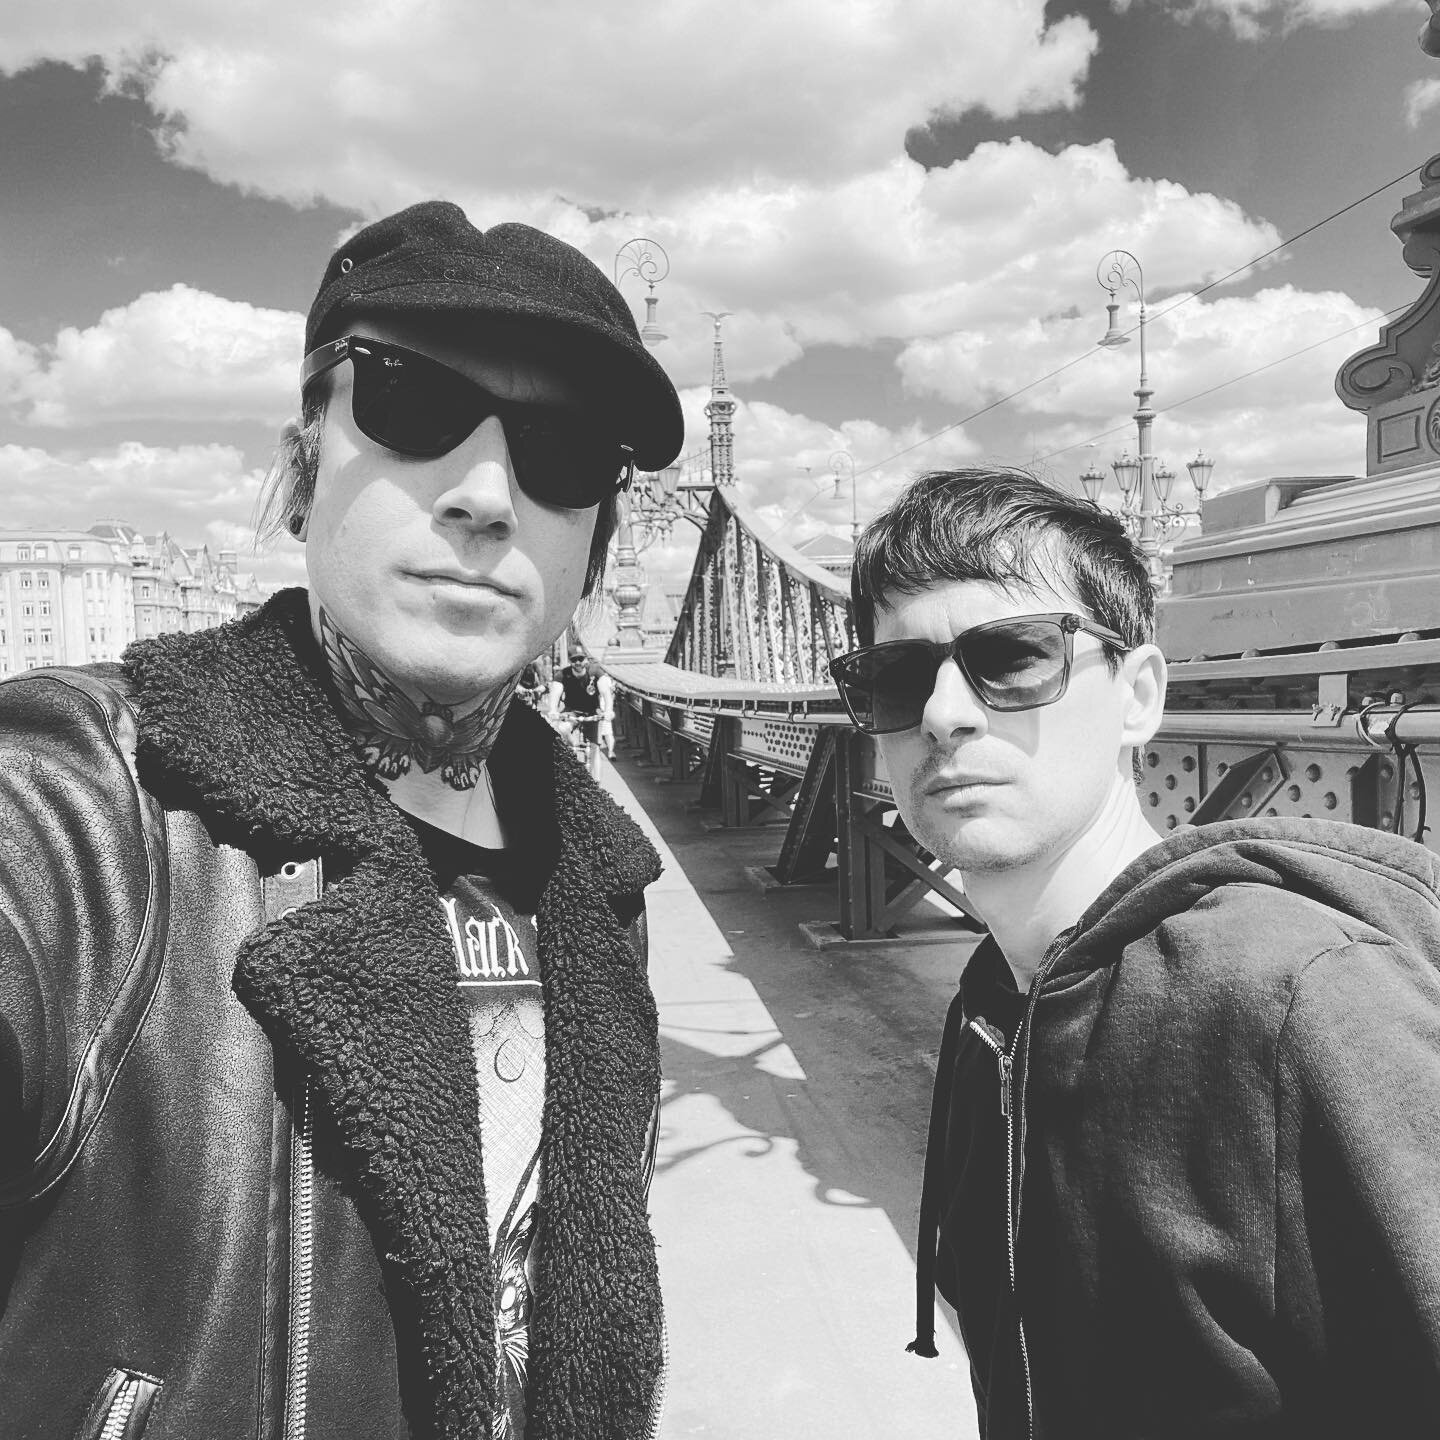 The boys are back in town! Tonight in #Budapest at Robot with @empathytest!

May 09 - Budapest, HU
May 10 - Vienna, AT SOLD OUT
May 11 - Munich, DE 
May 12 - Halle (Saale), DE 
May 13 - Hamburg, DE 

#industrialpop #aestheticperfection #industrialroc